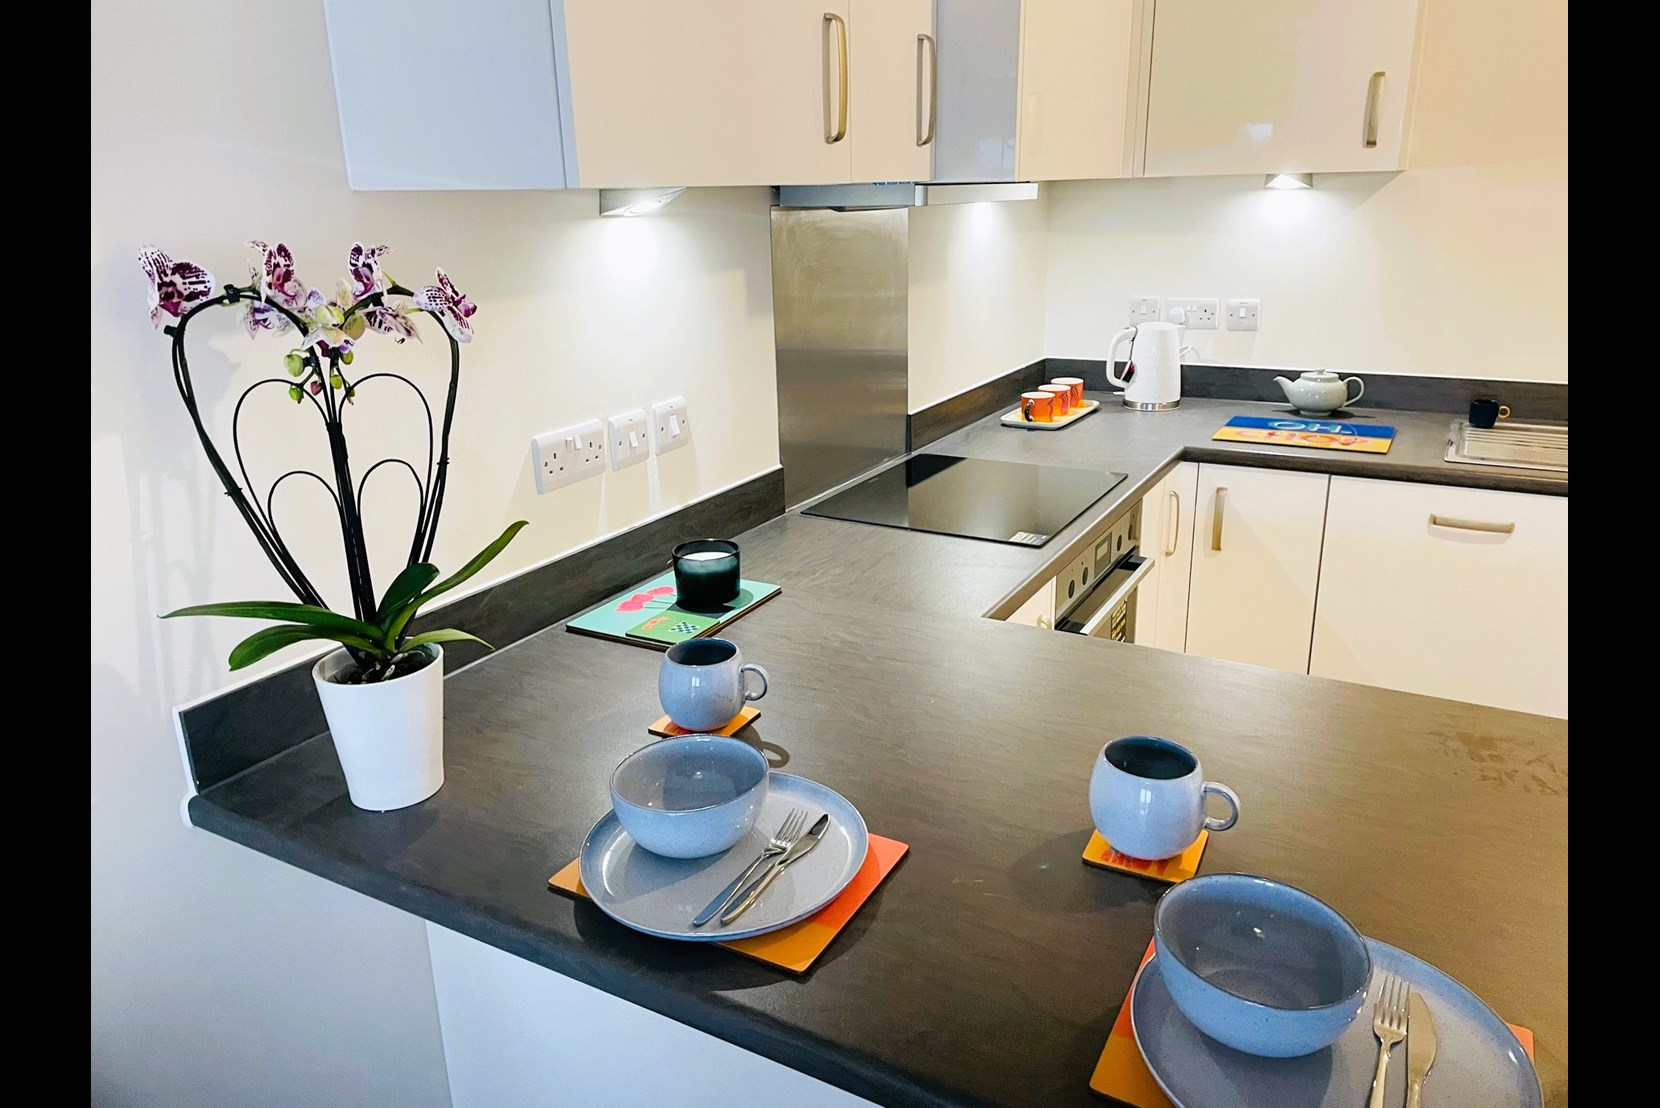 Apartments to Rent by Una Living in Hunslet House, Corby, NN17, kitchen